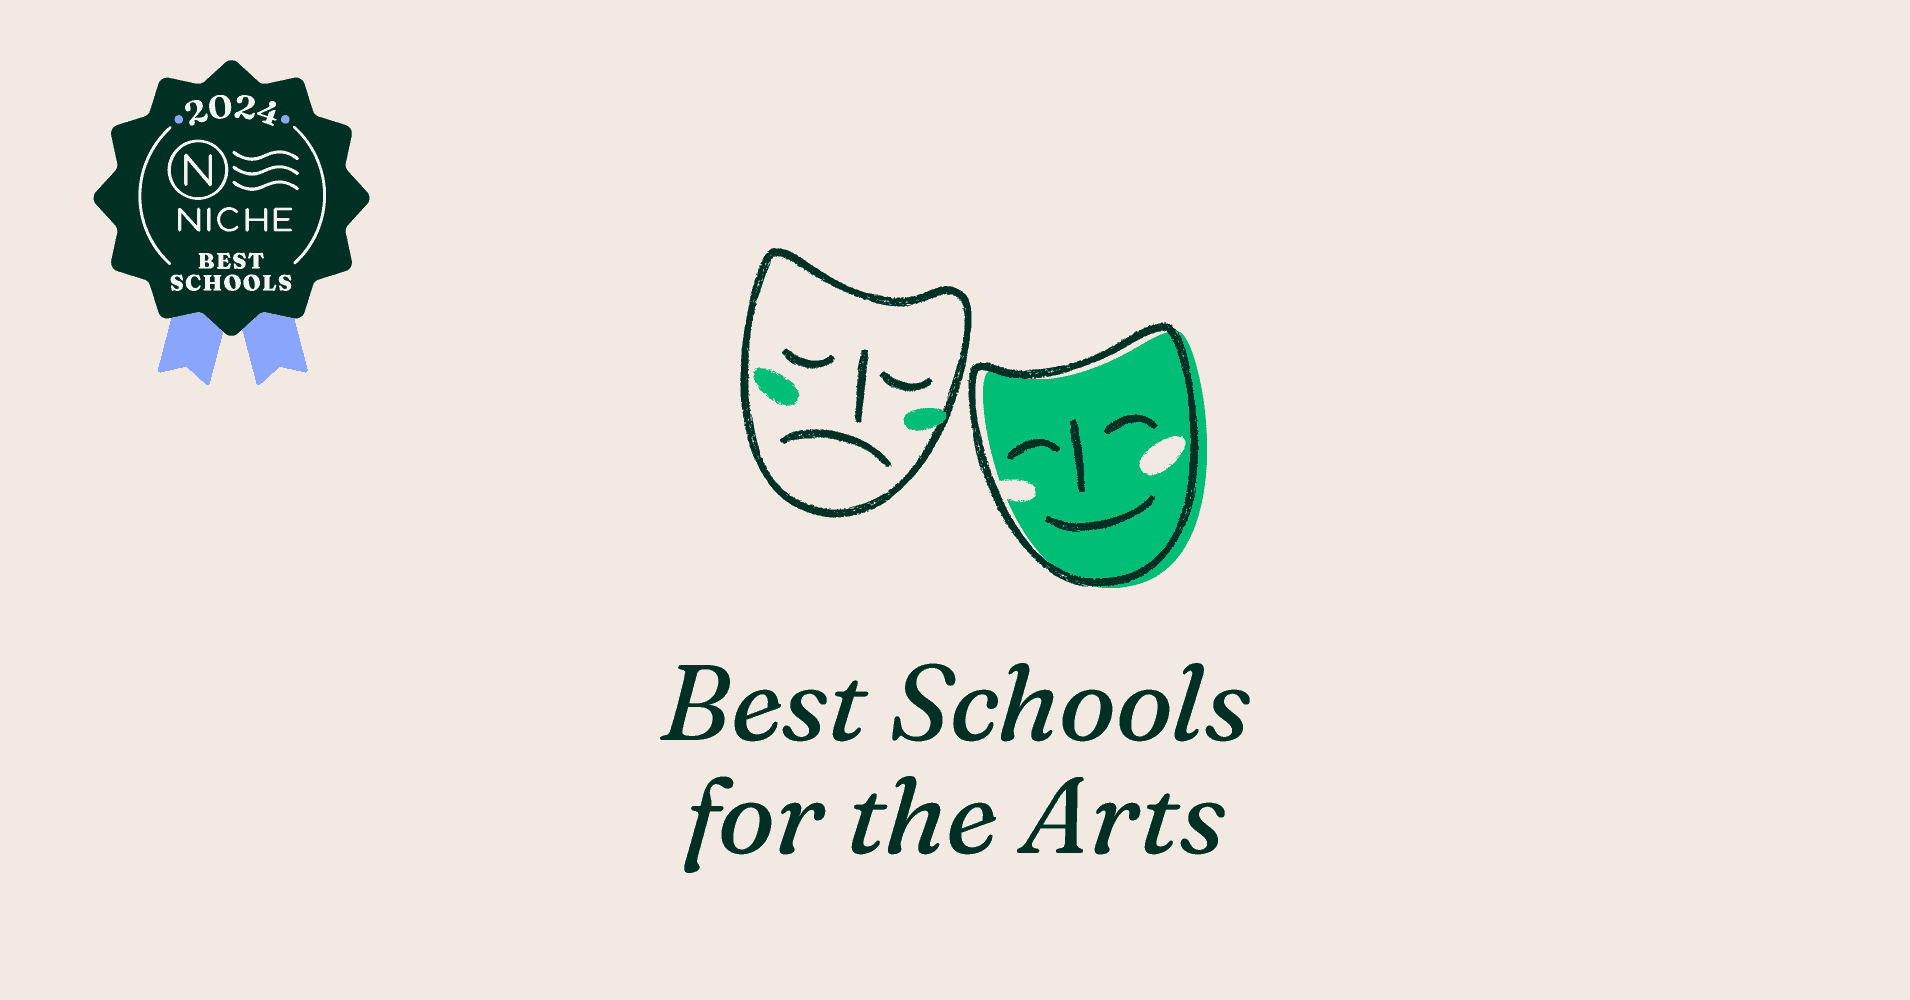 University School of the Lowcountry is a proud 2024 NICHE Best School for the Arts honoree.